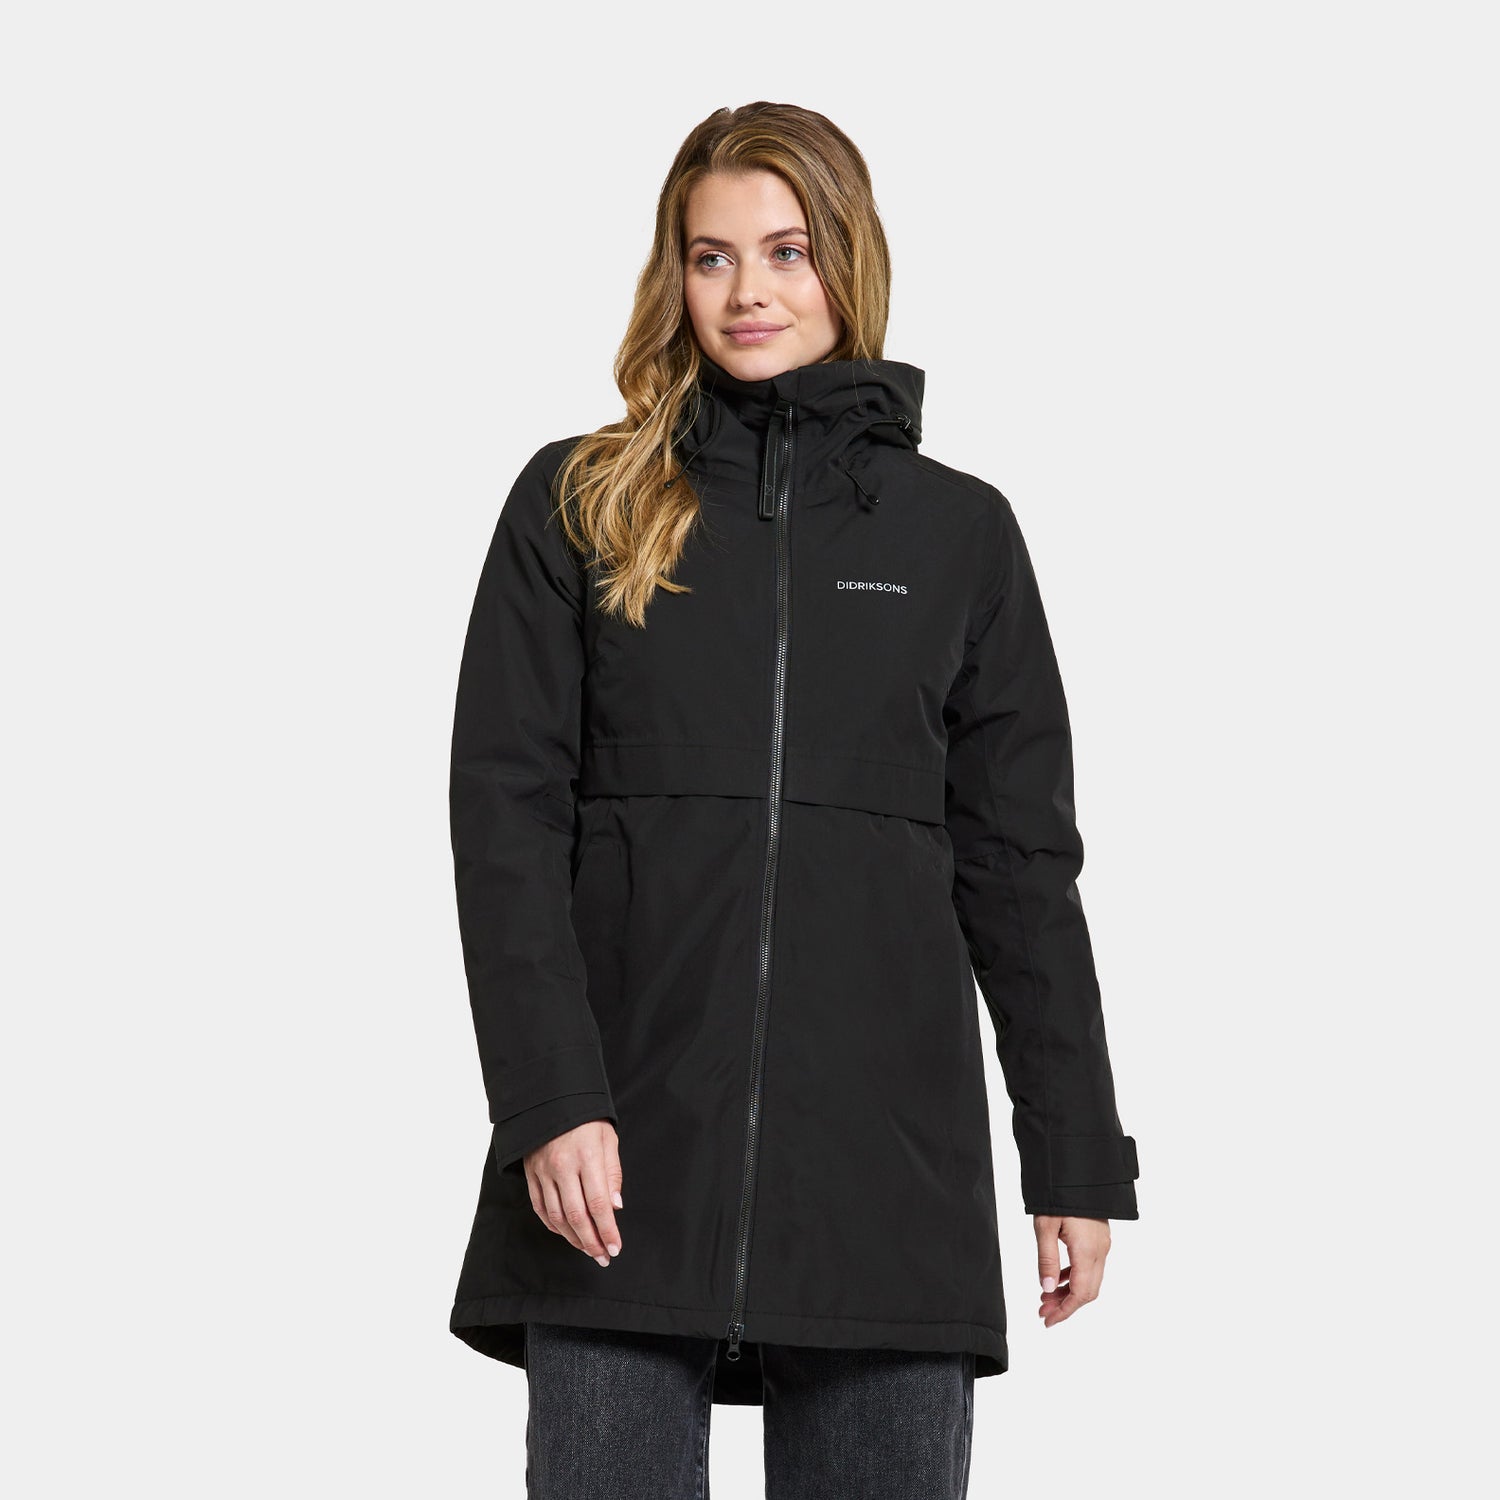 Didriksons – 5 Forest Helle Parka Clothing New Womens